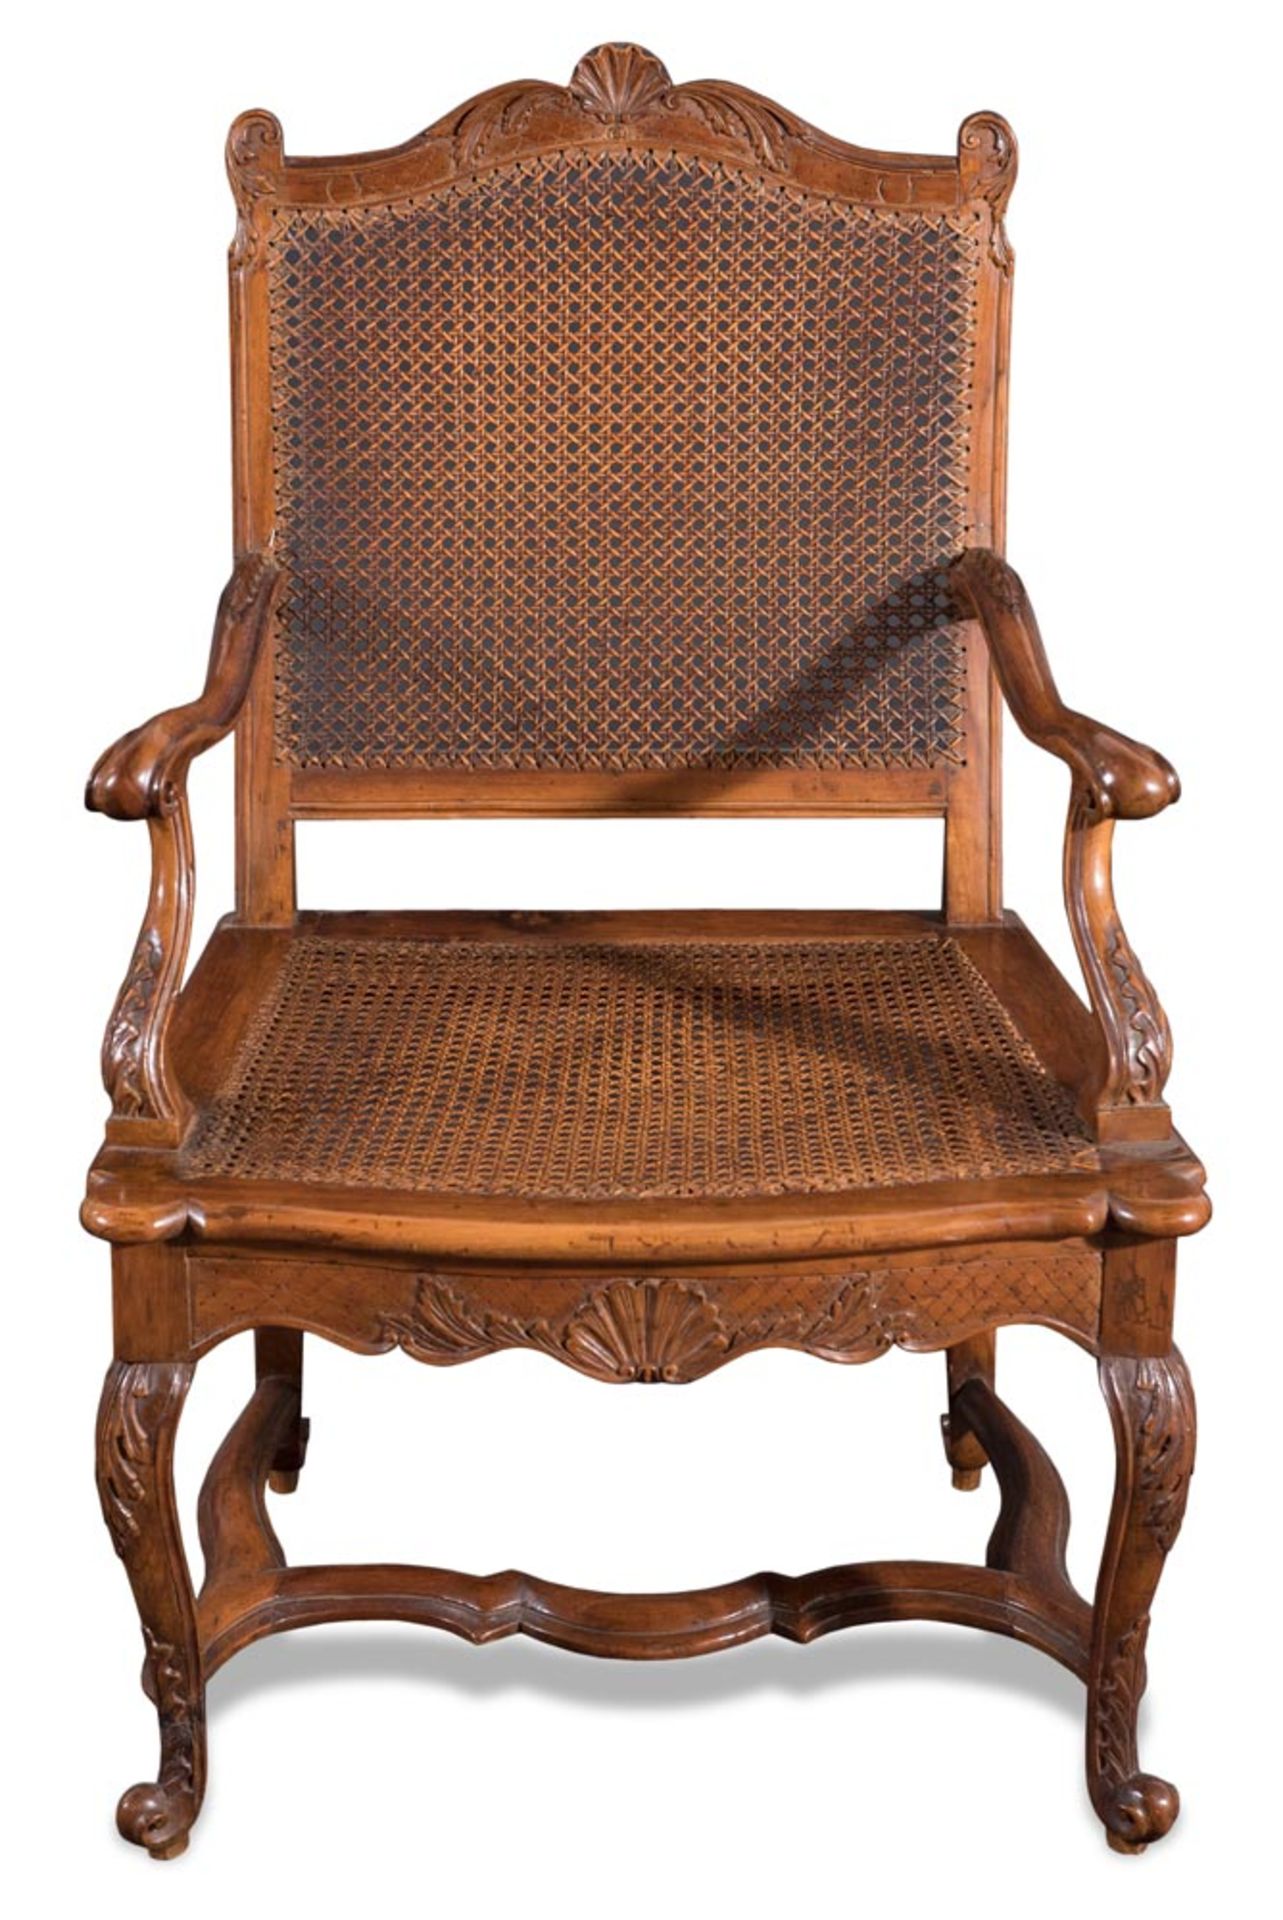 Carved walnut fauteuils with caned back and seat, X18th Century. - Image 2 of 2